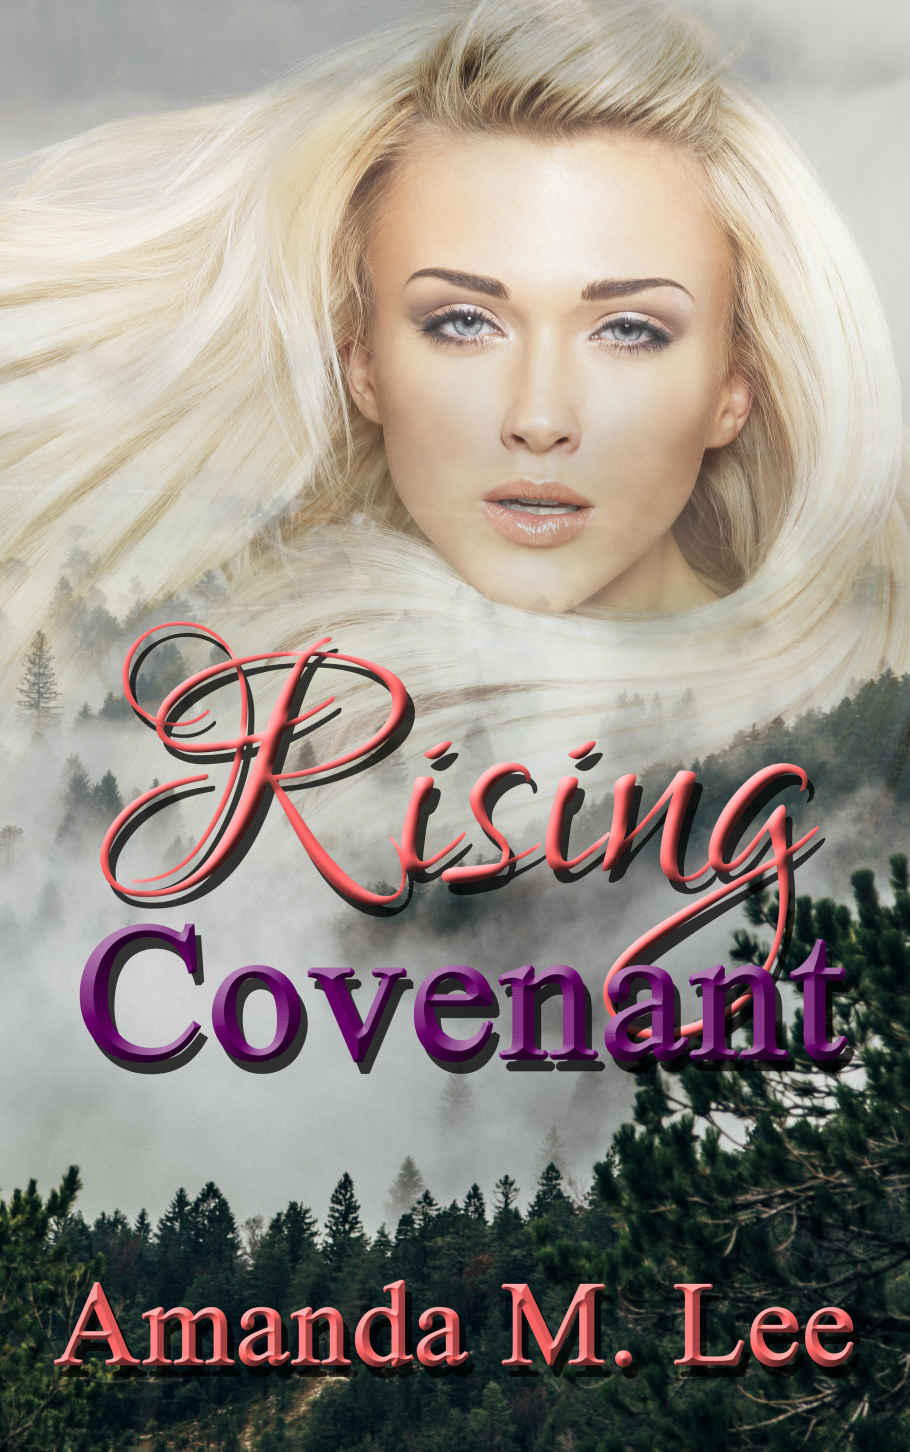 Rising Covenant (Living Covenant Trilogy Book 1) by Amanda M. Lee